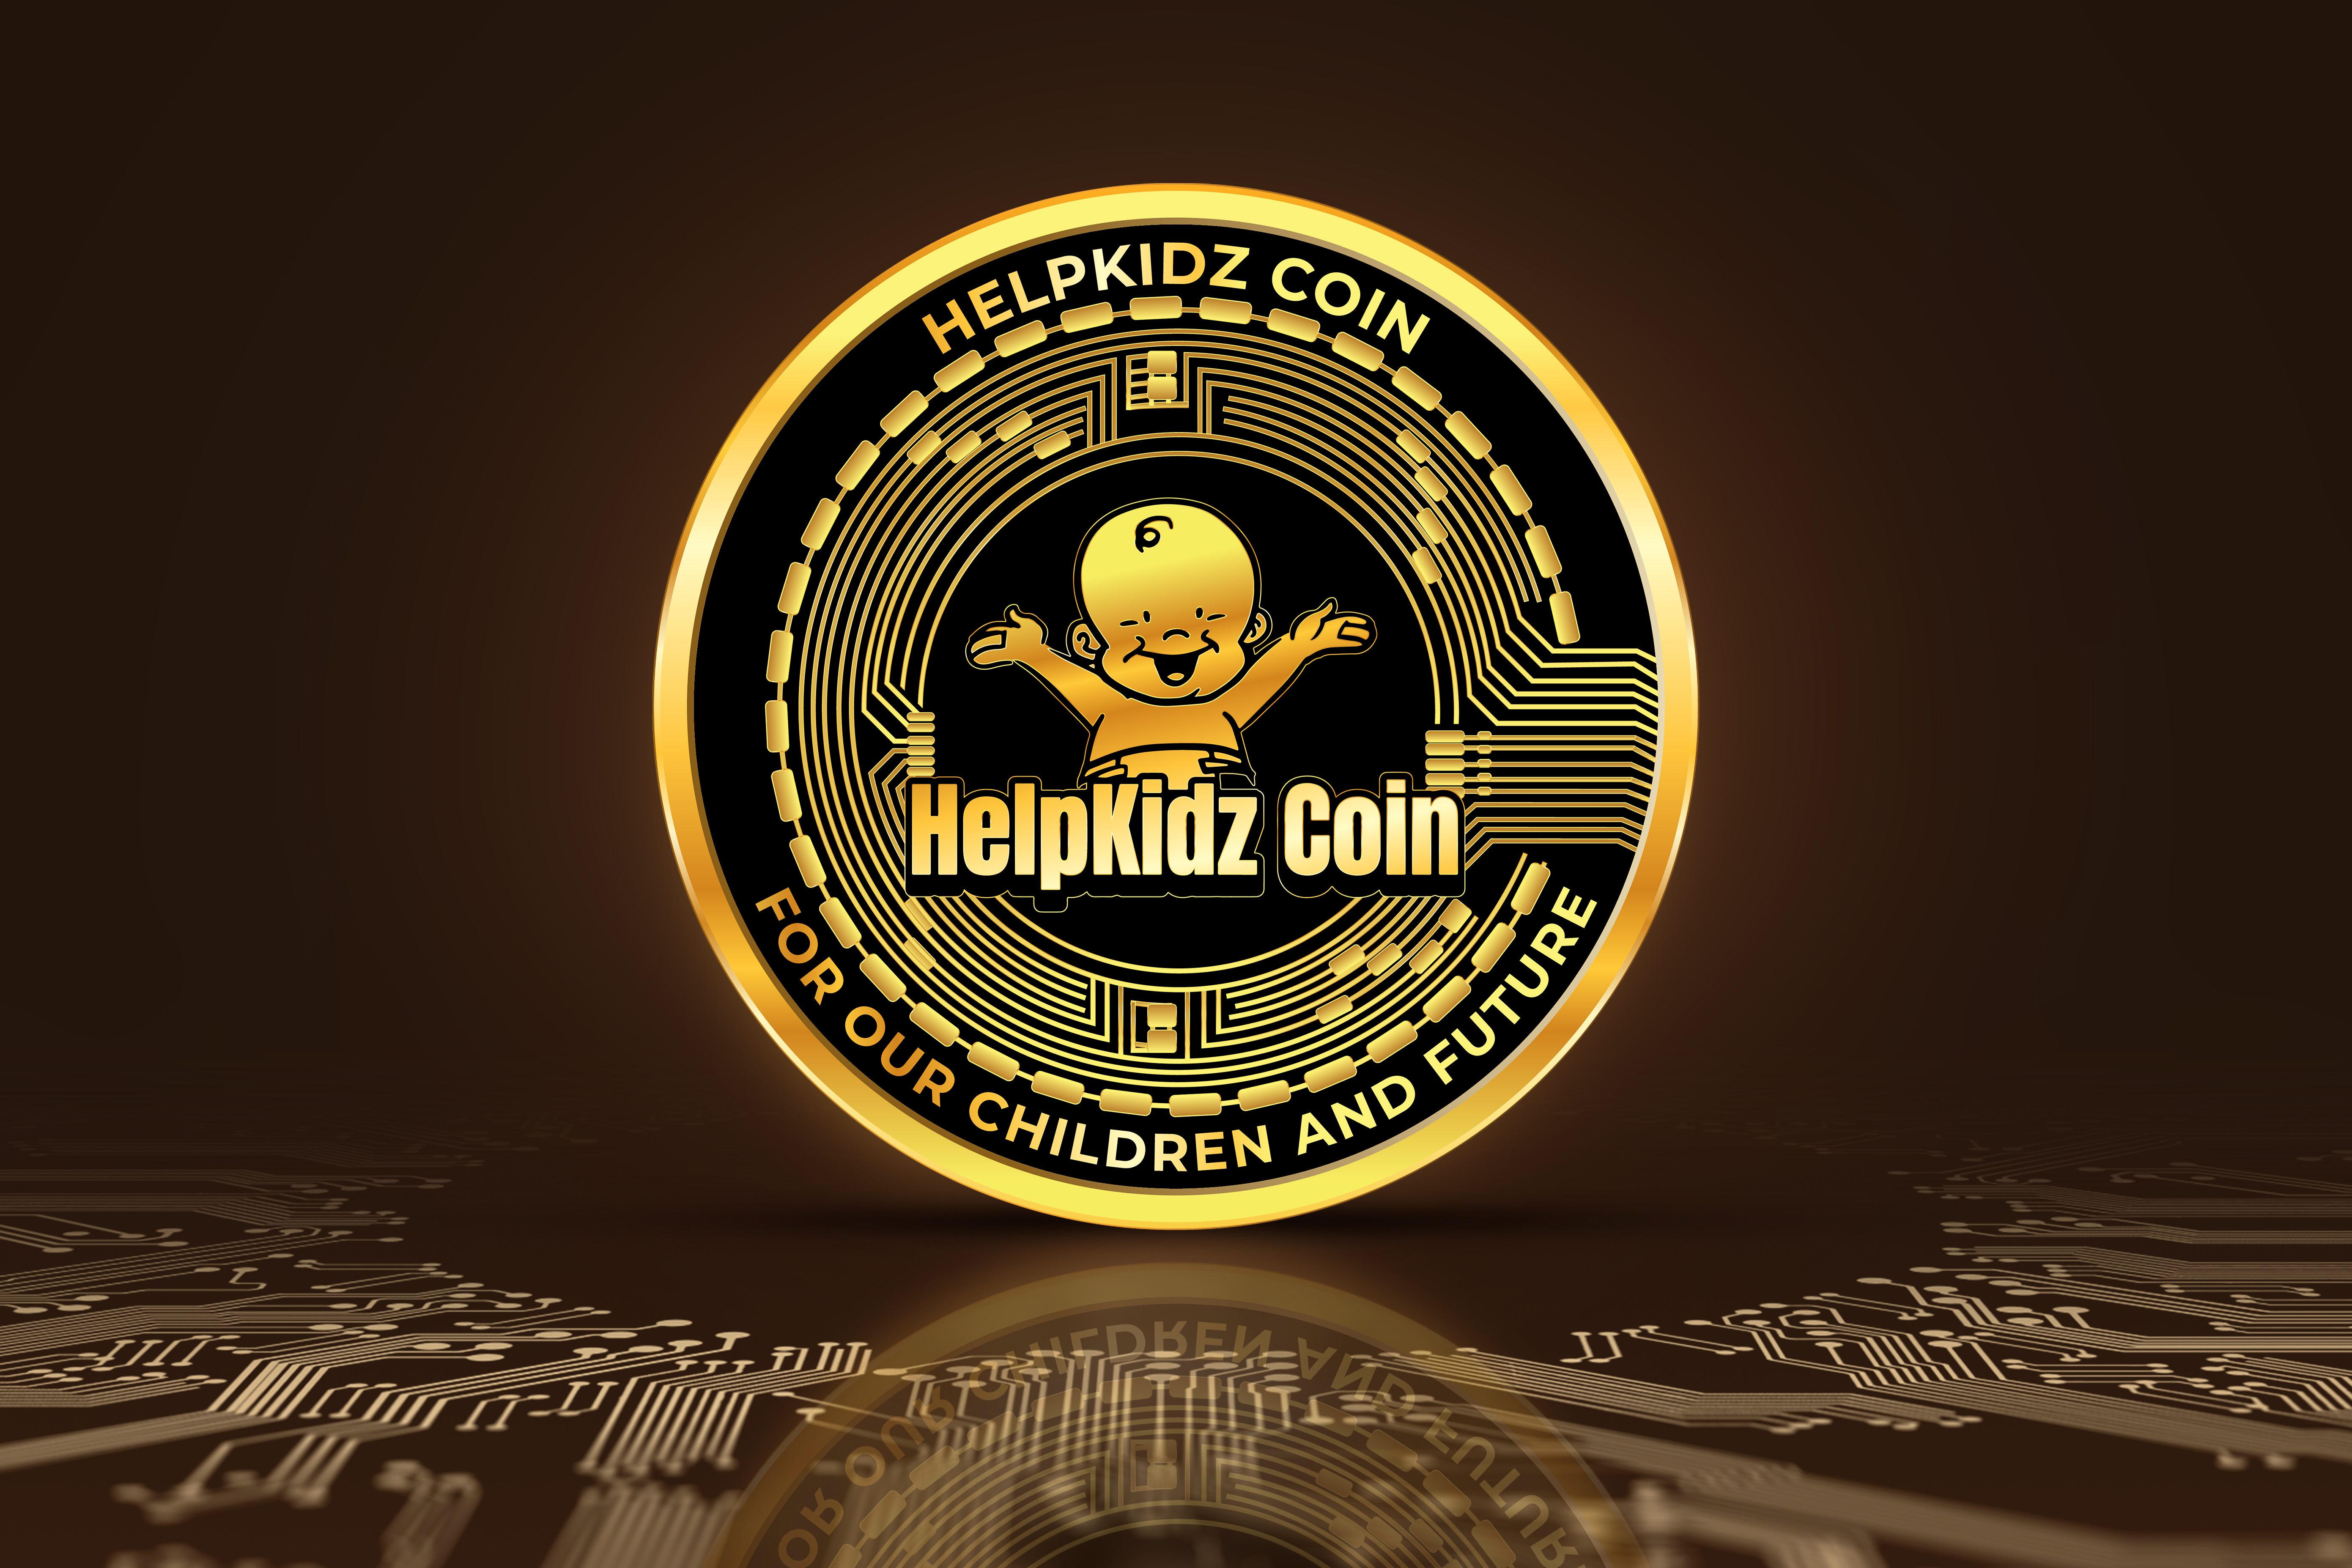 what-makes-helpkidz-coin-stand-out-from-other-cryptocurrencies